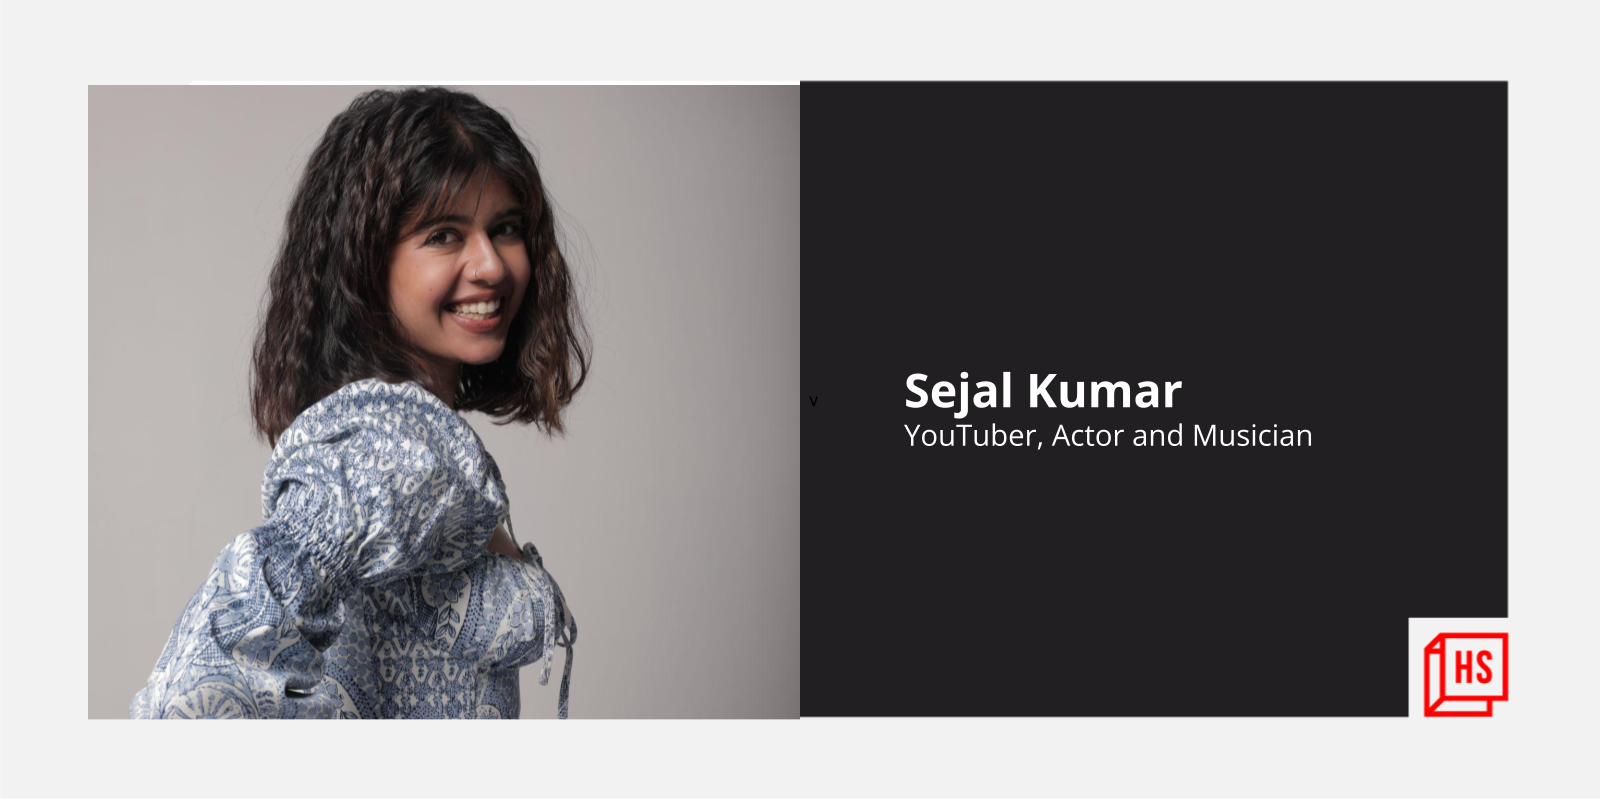 Sejal Kumar on working with Michelle Obama, monetising content, women’s issues, more
